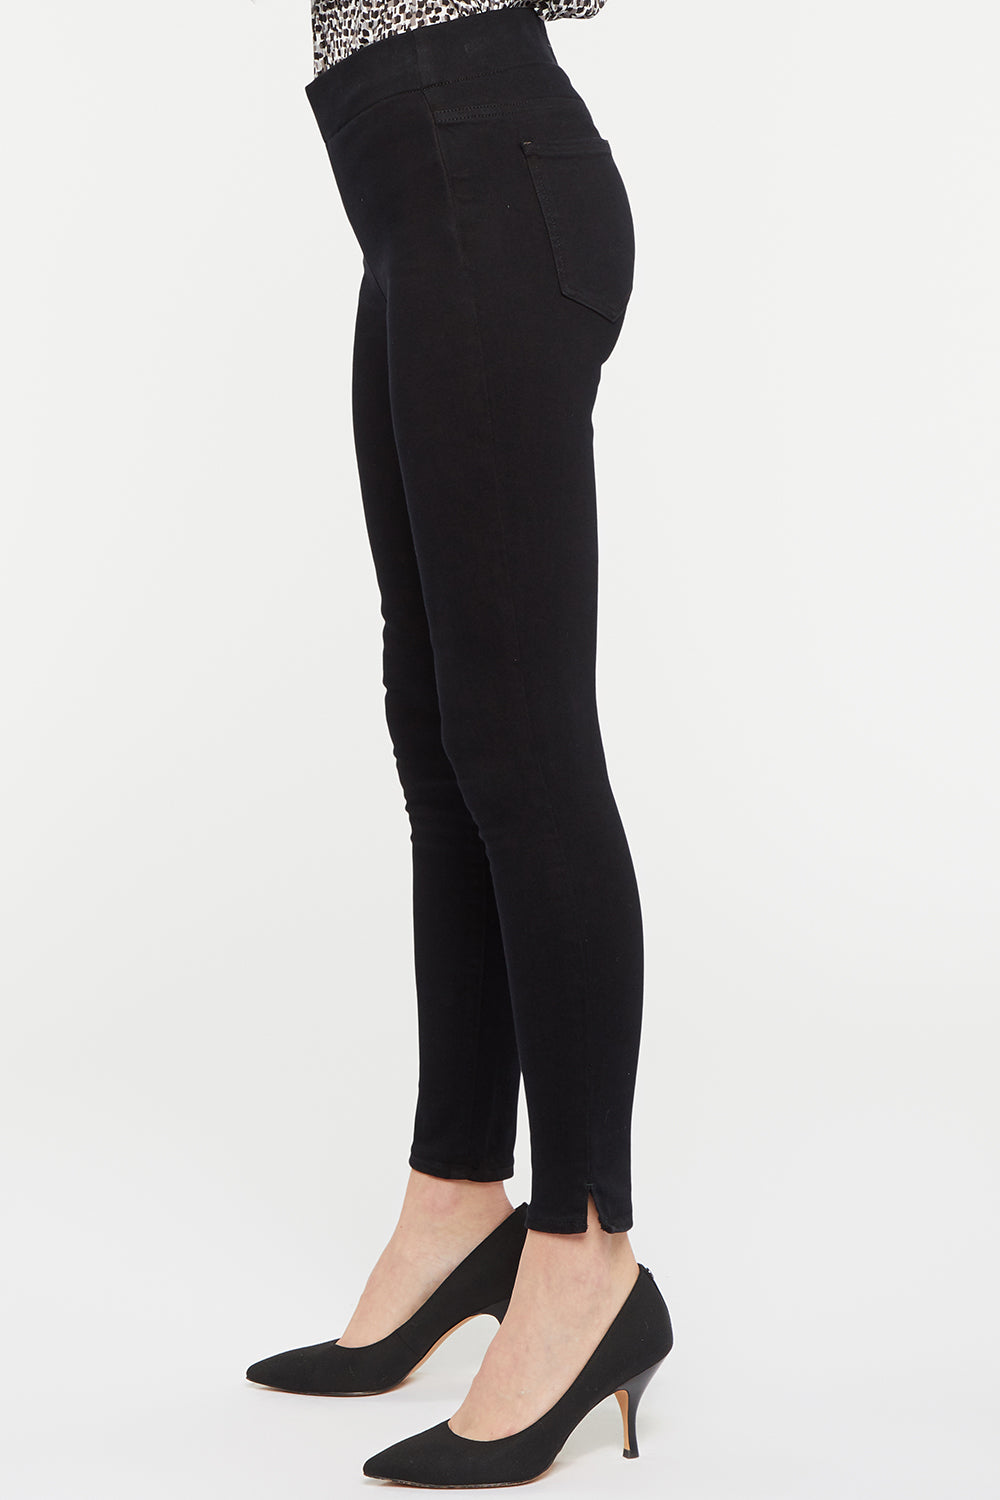 THIN HER ANKLE PANT - BLACK — Jernigan's